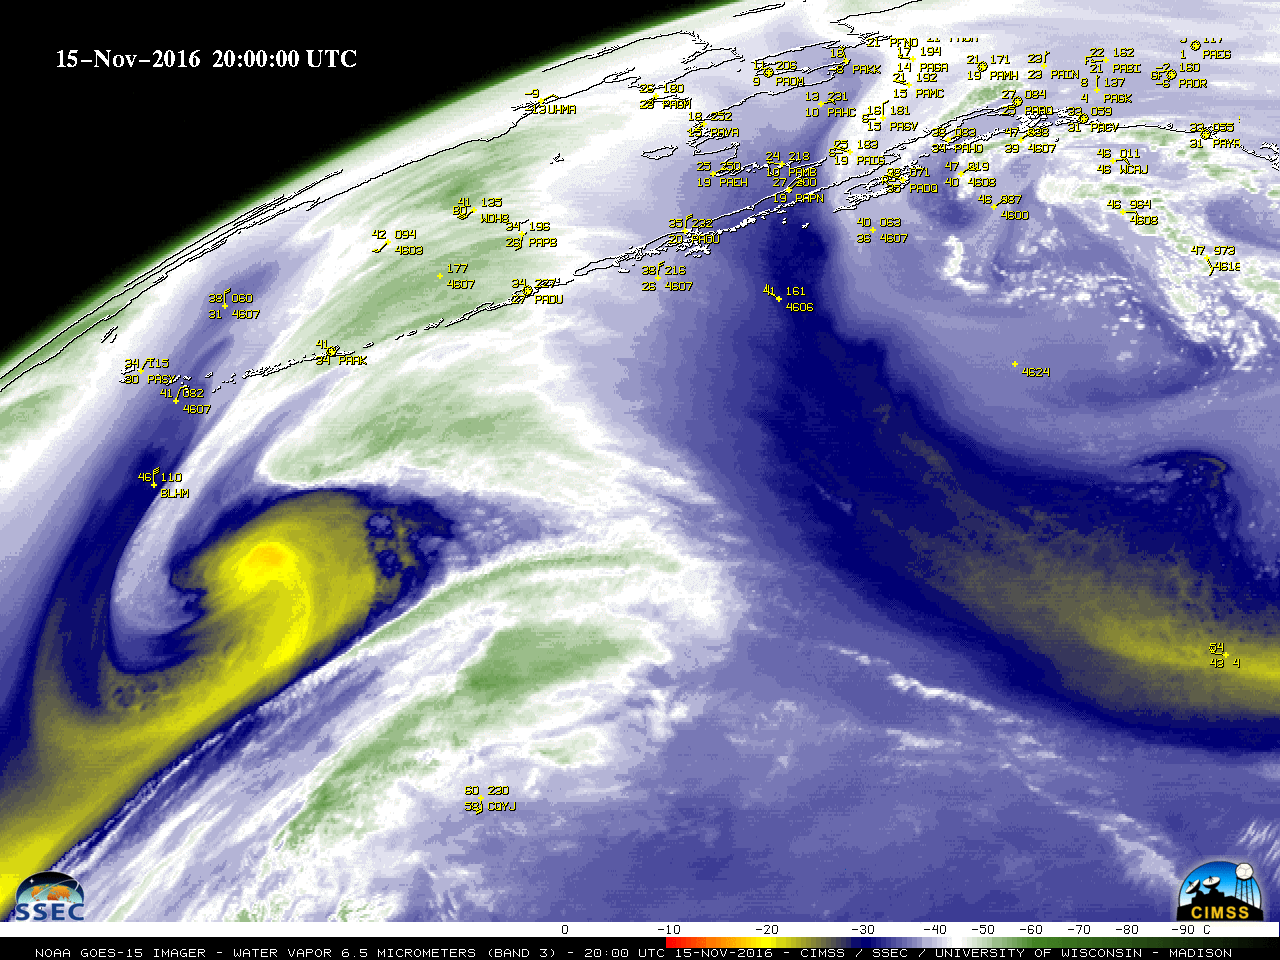 GOES-15 Water Vapor (6.5 µm) images, with hourly surface and buoy/ship reports [click to play MP4 animation]